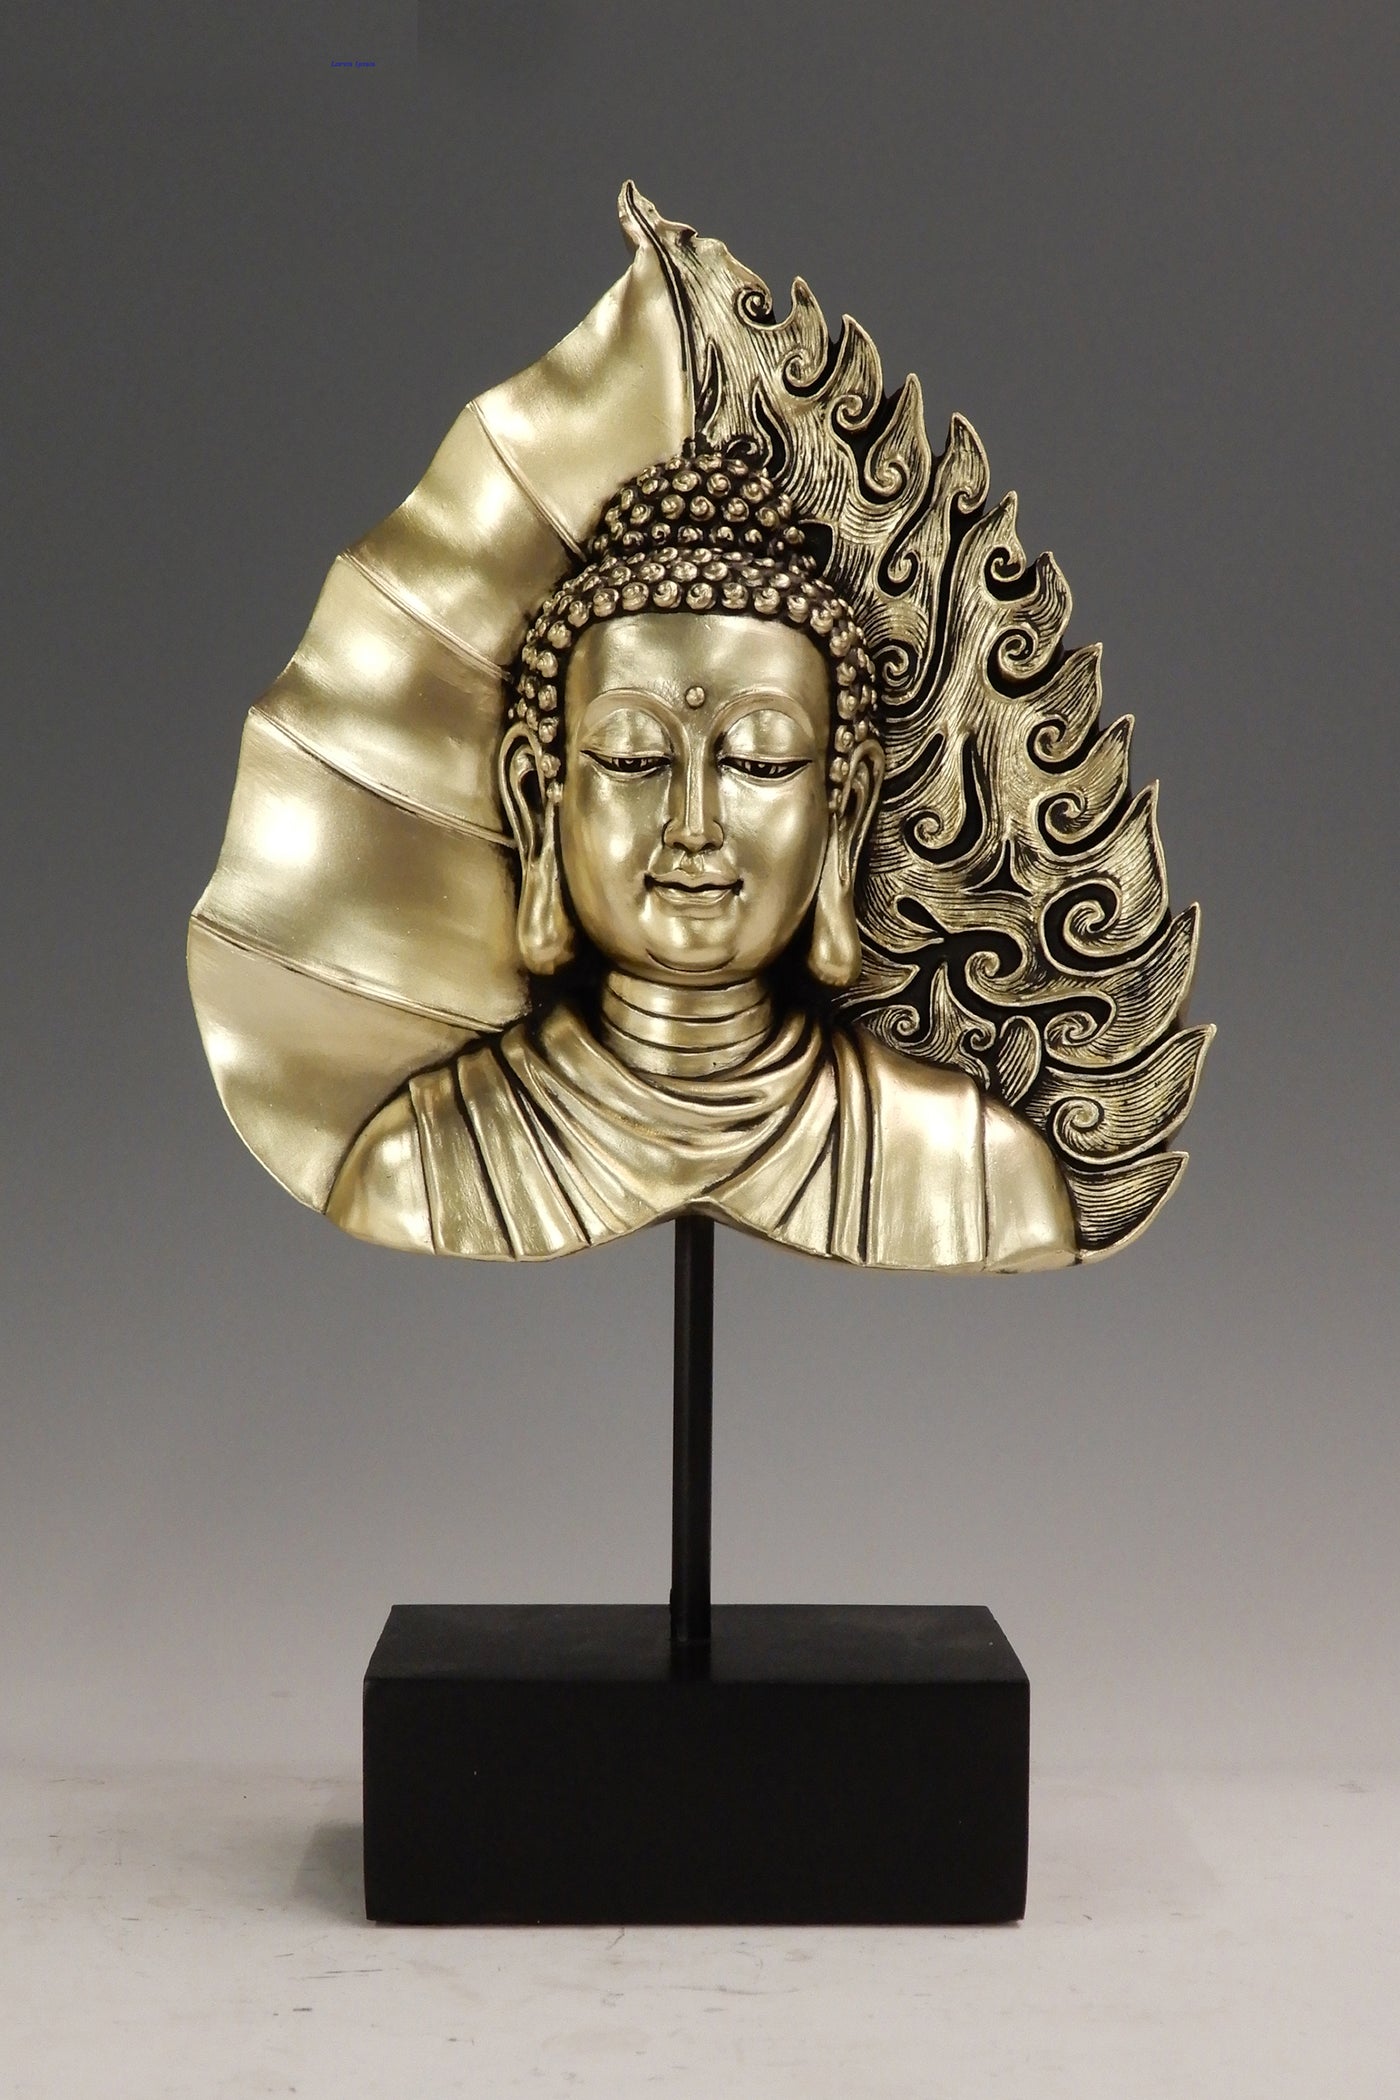 Buddha's face in Leaf on the black base for your home or office decor